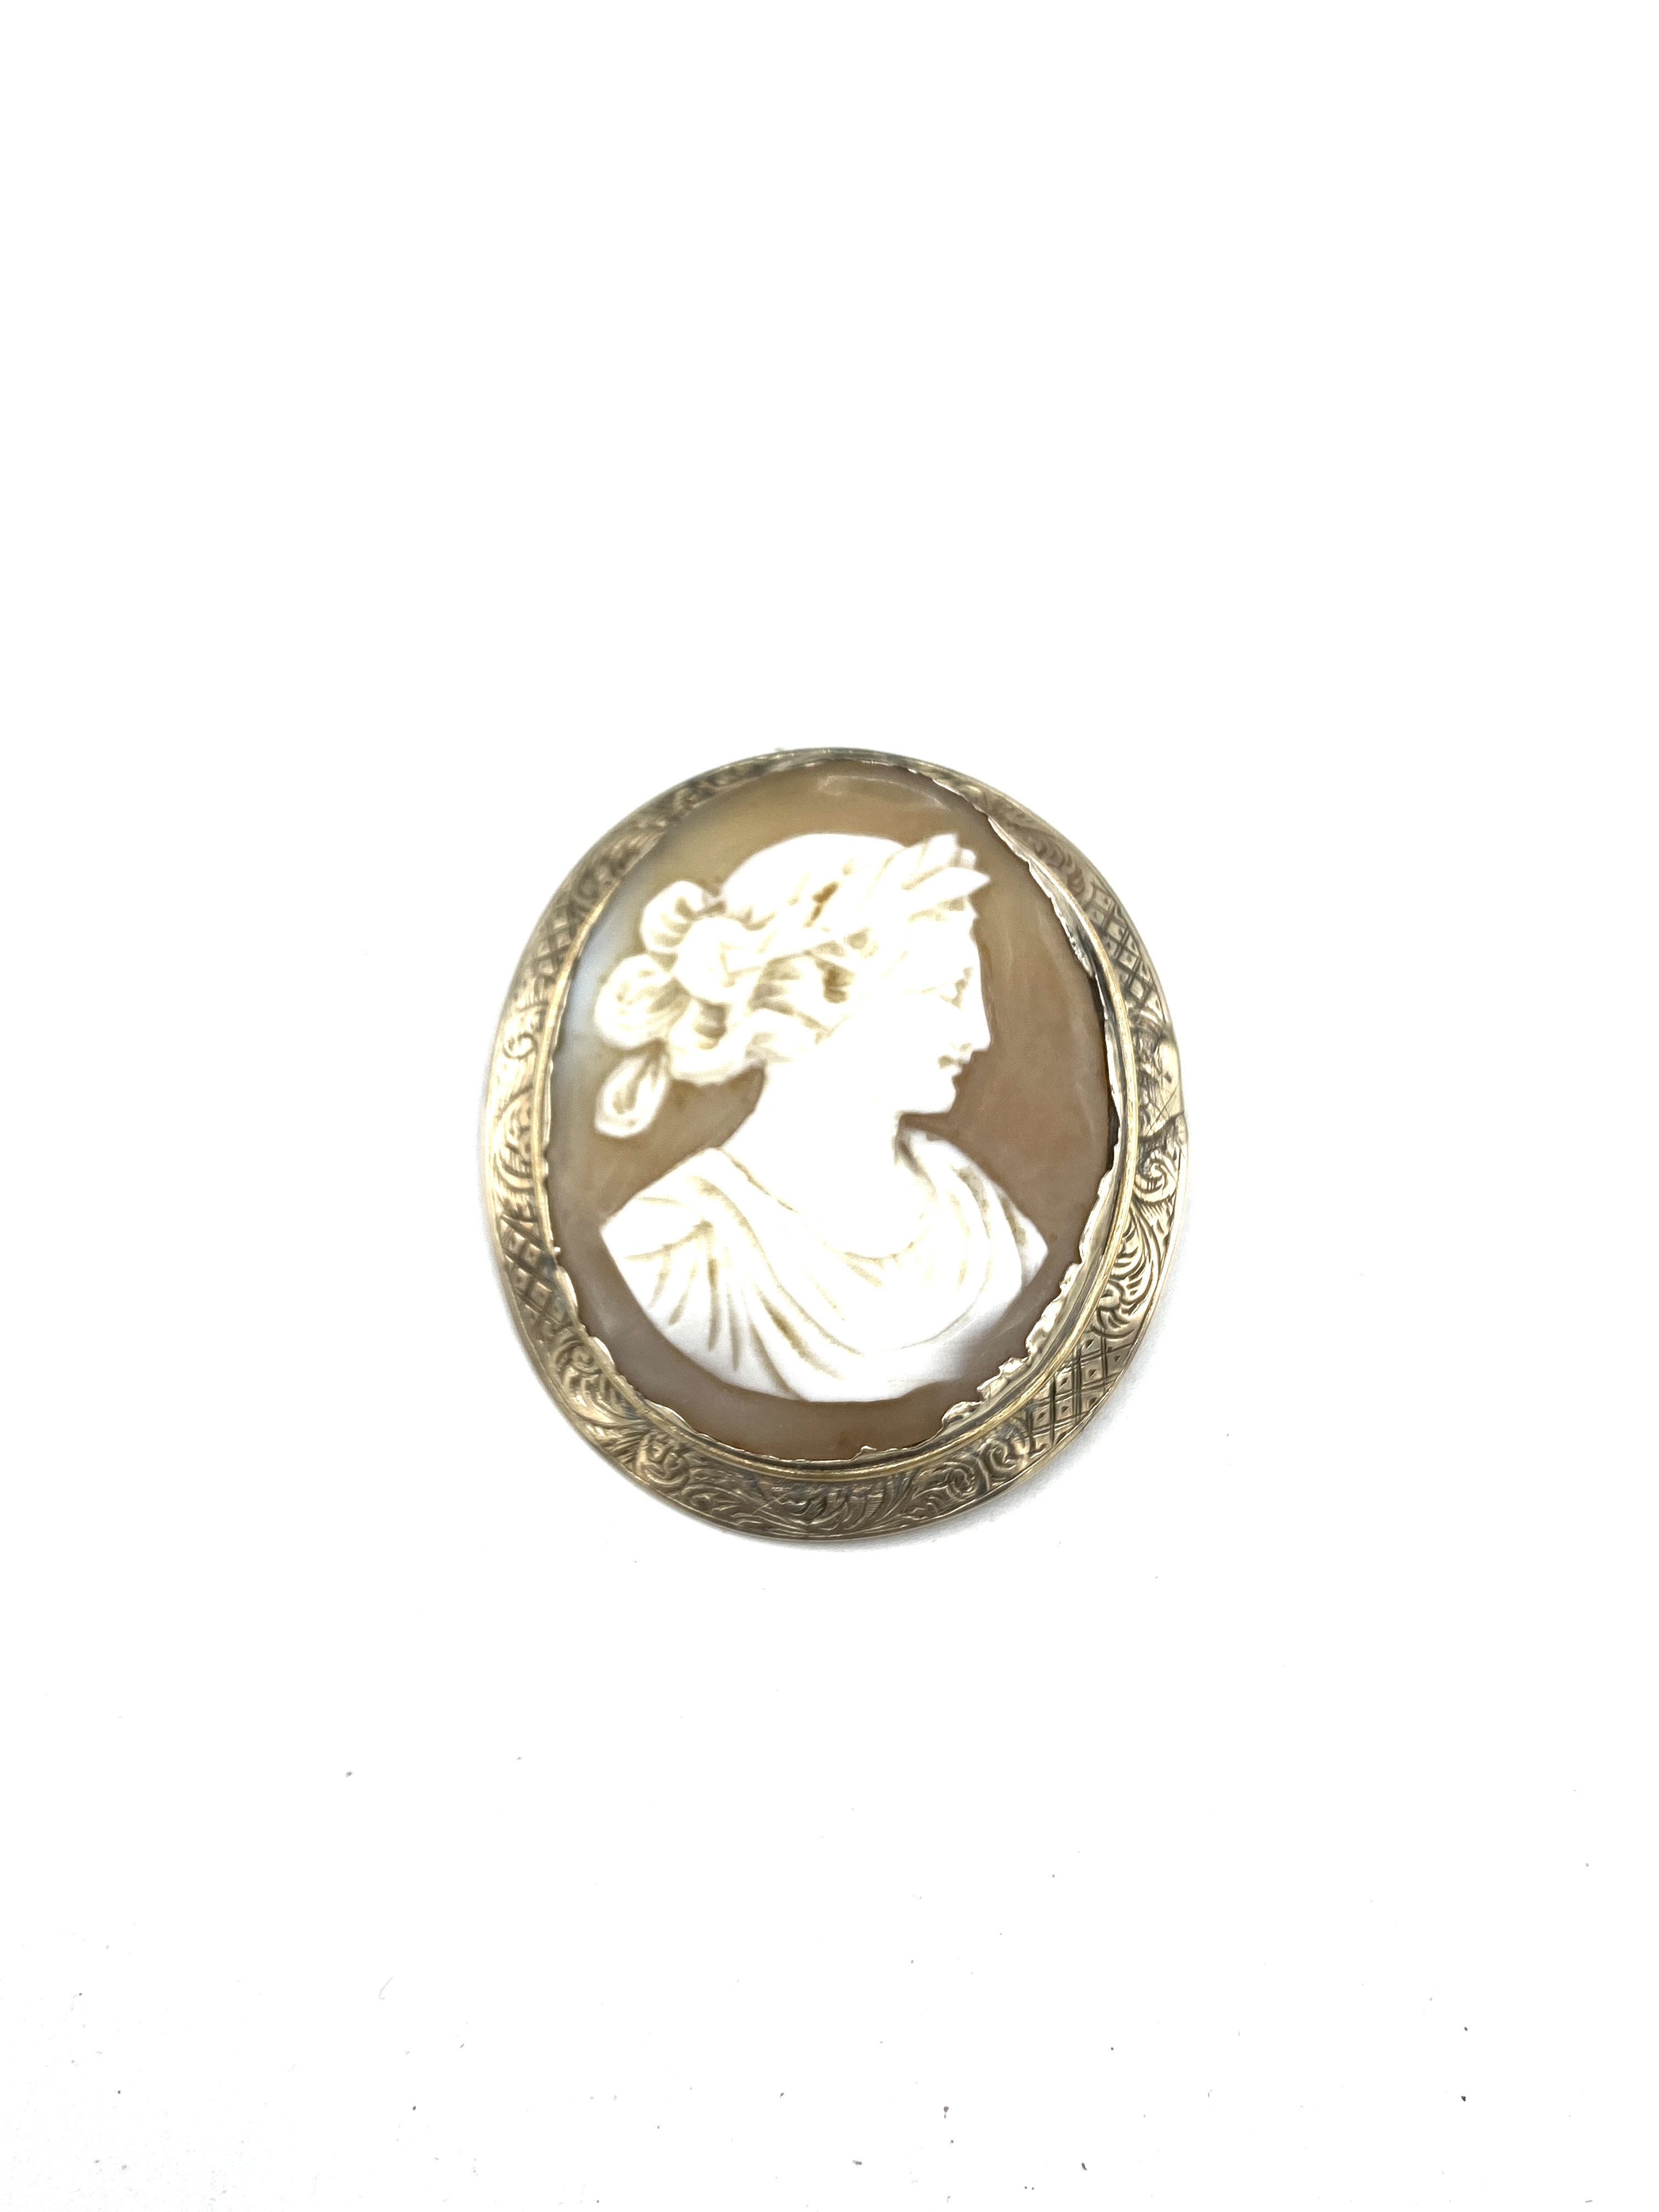 9ct gold necklace and cameo brooch - Image 2 of 3